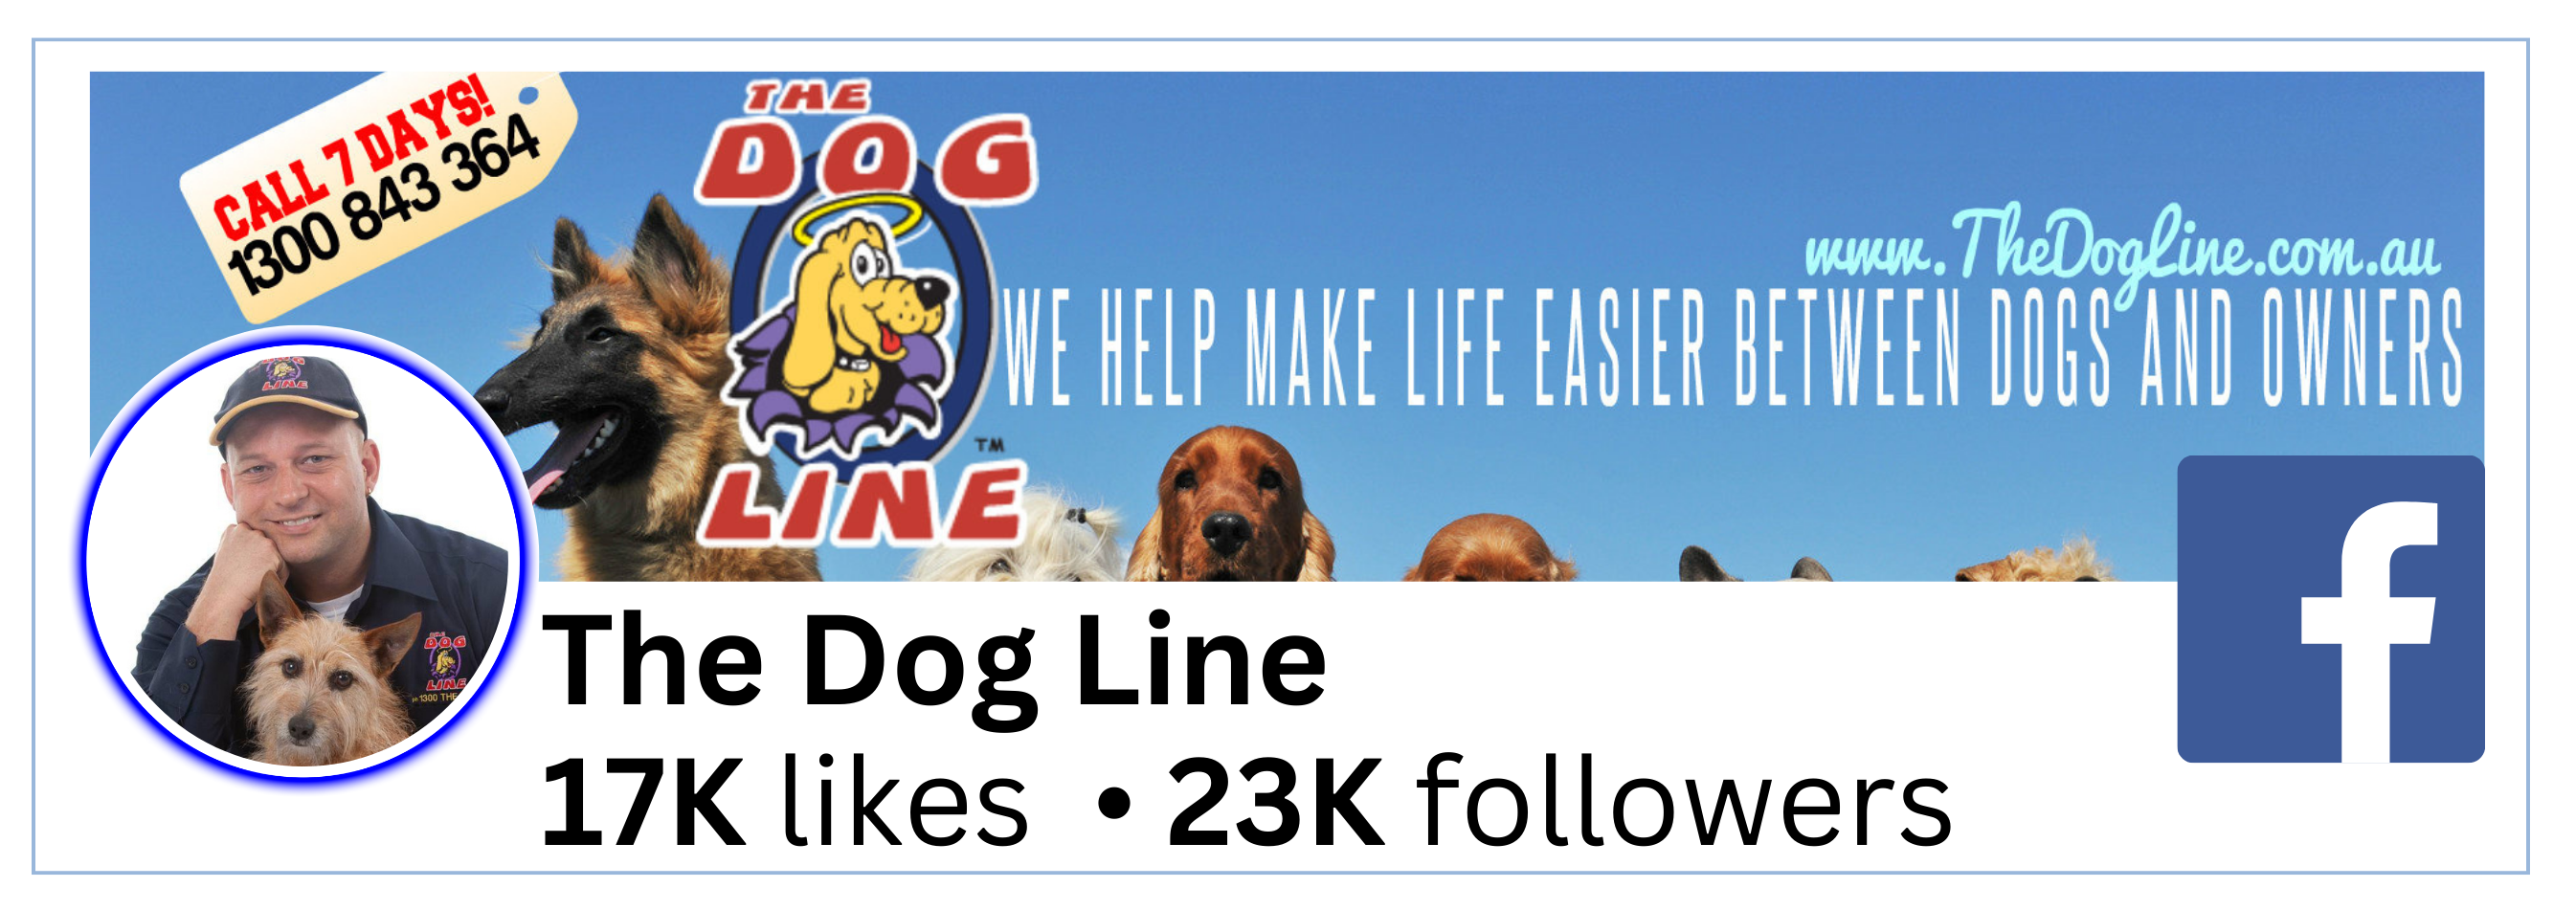 The Dog Line Facebook Page